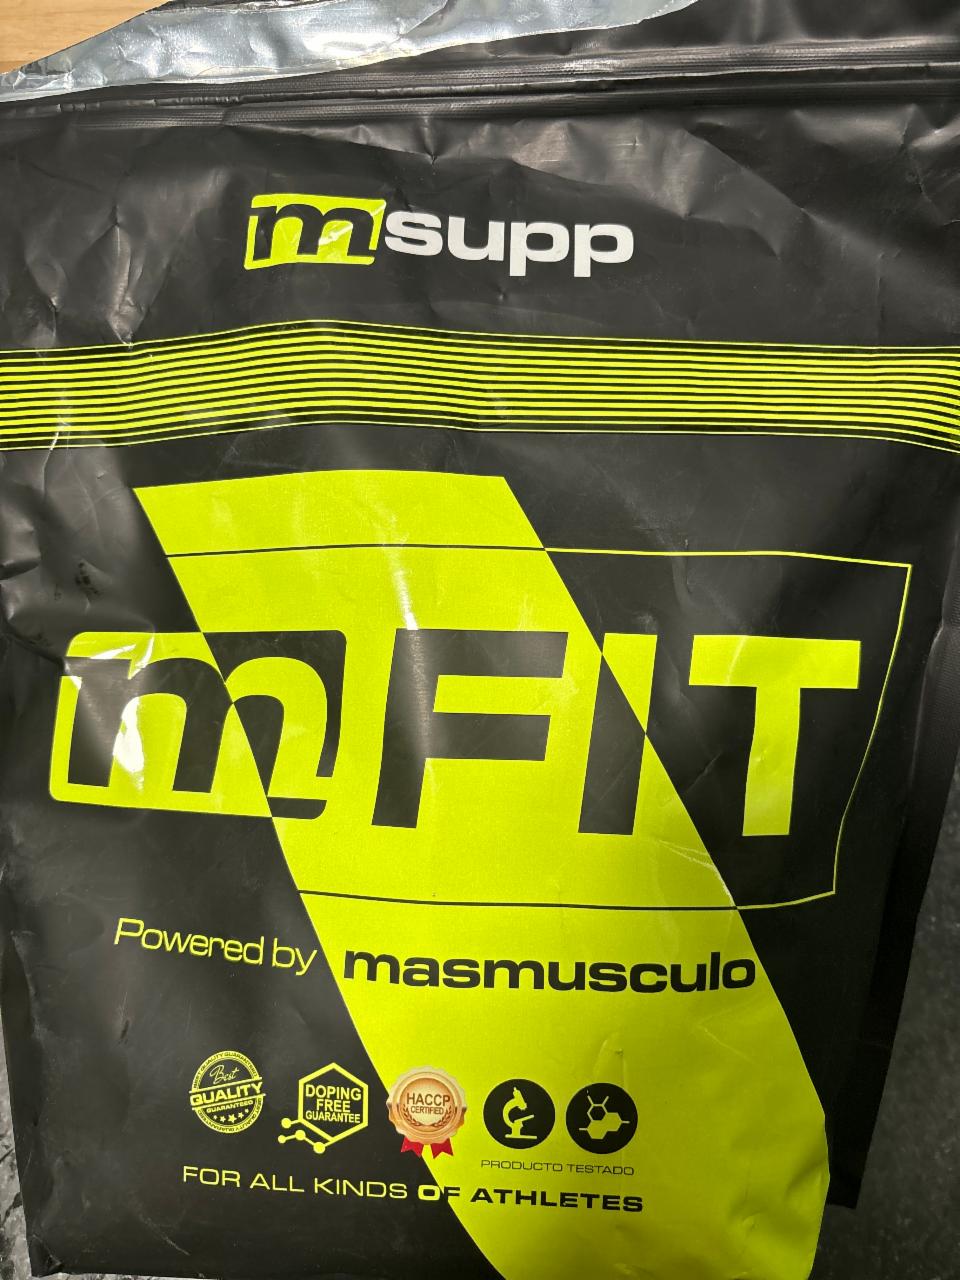 Fotografie - mFIT Whey masmusculo chocolate intenso Msupp